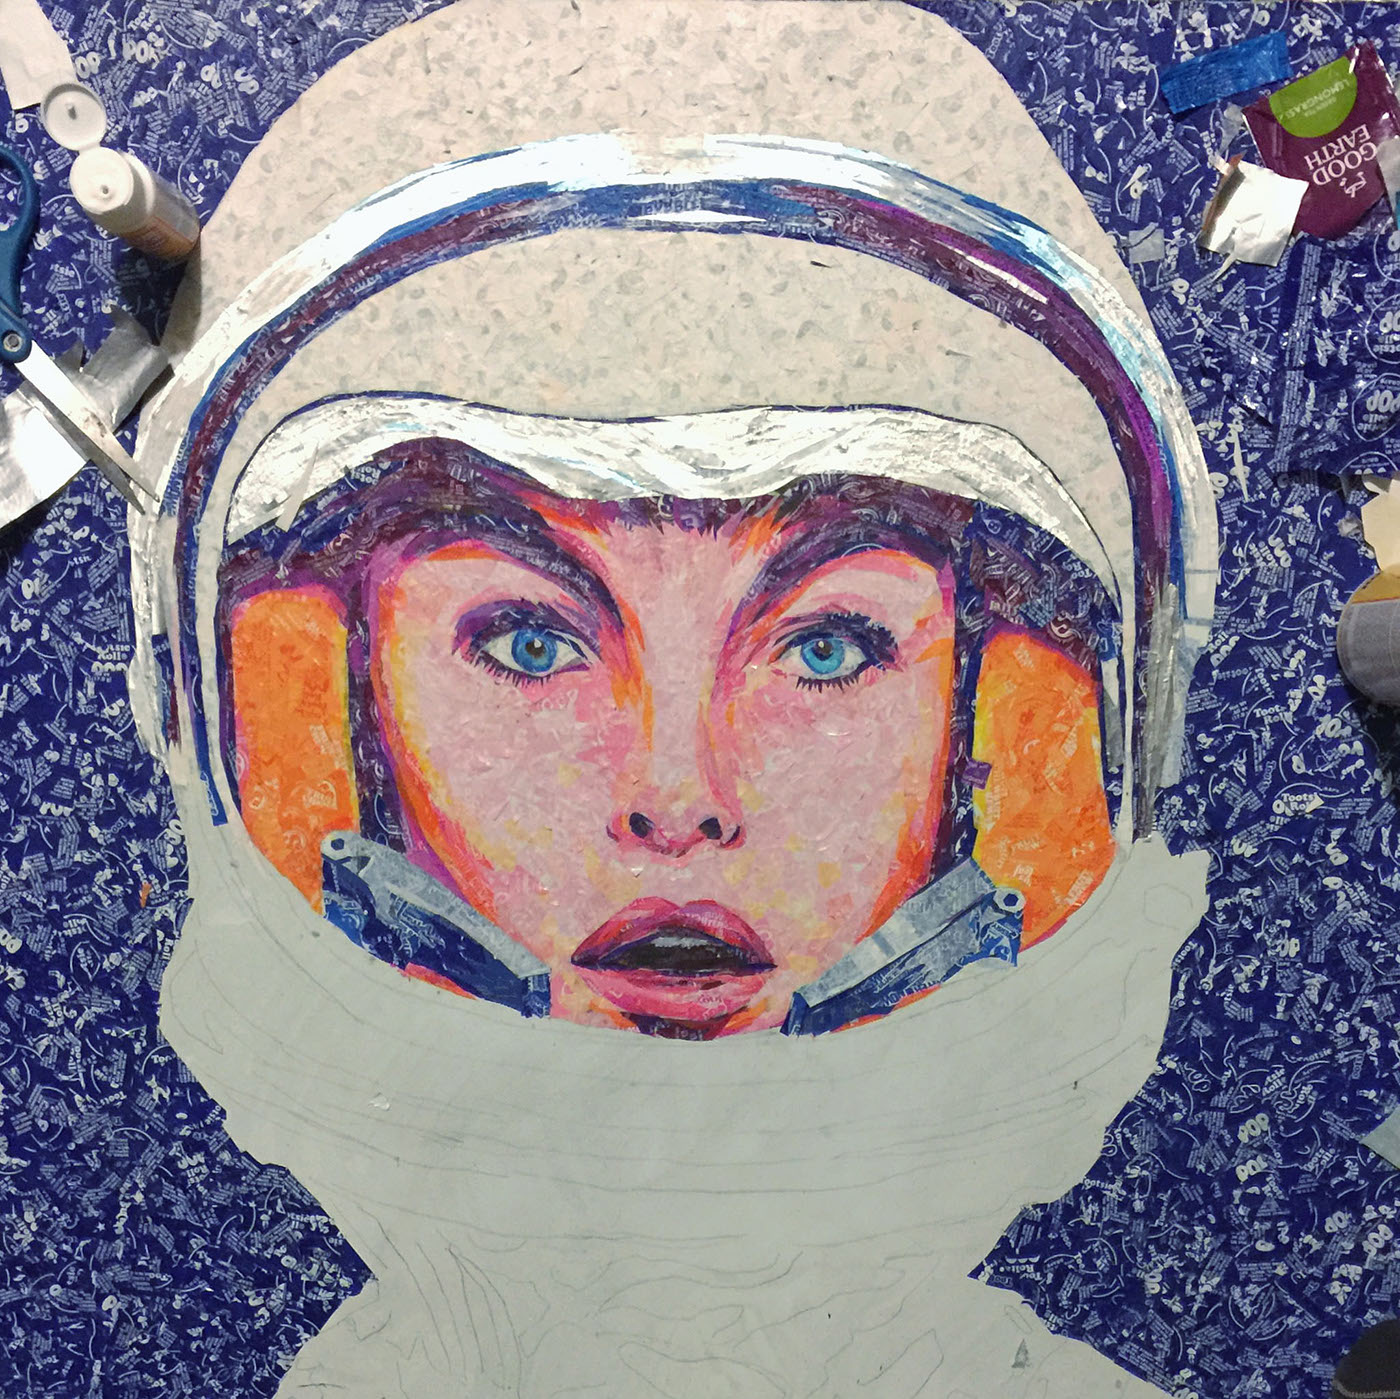 #recycledart #recycle #mosaic #collage #woman #space #silver #fine art #pop art #upcycle